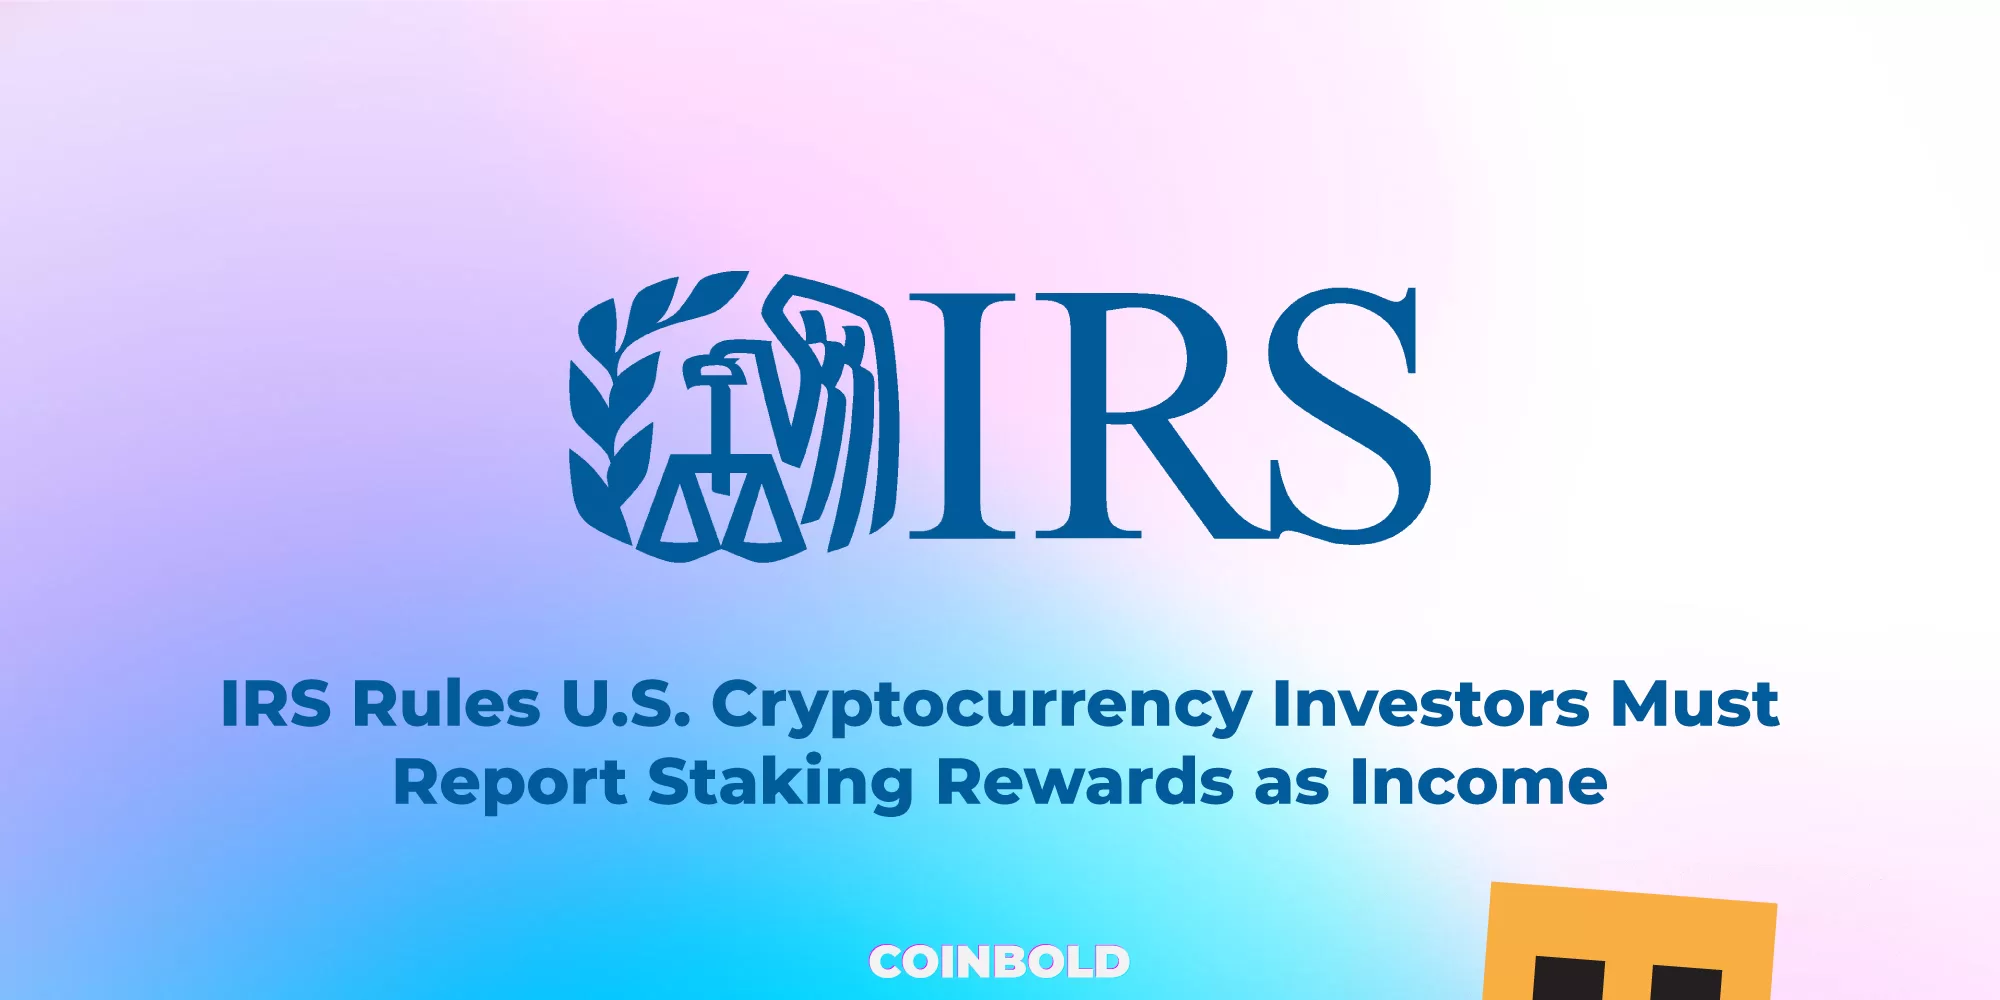 IRS Rules U.S. Cryptocurrency Investors Must Report Staking Rewards as Income